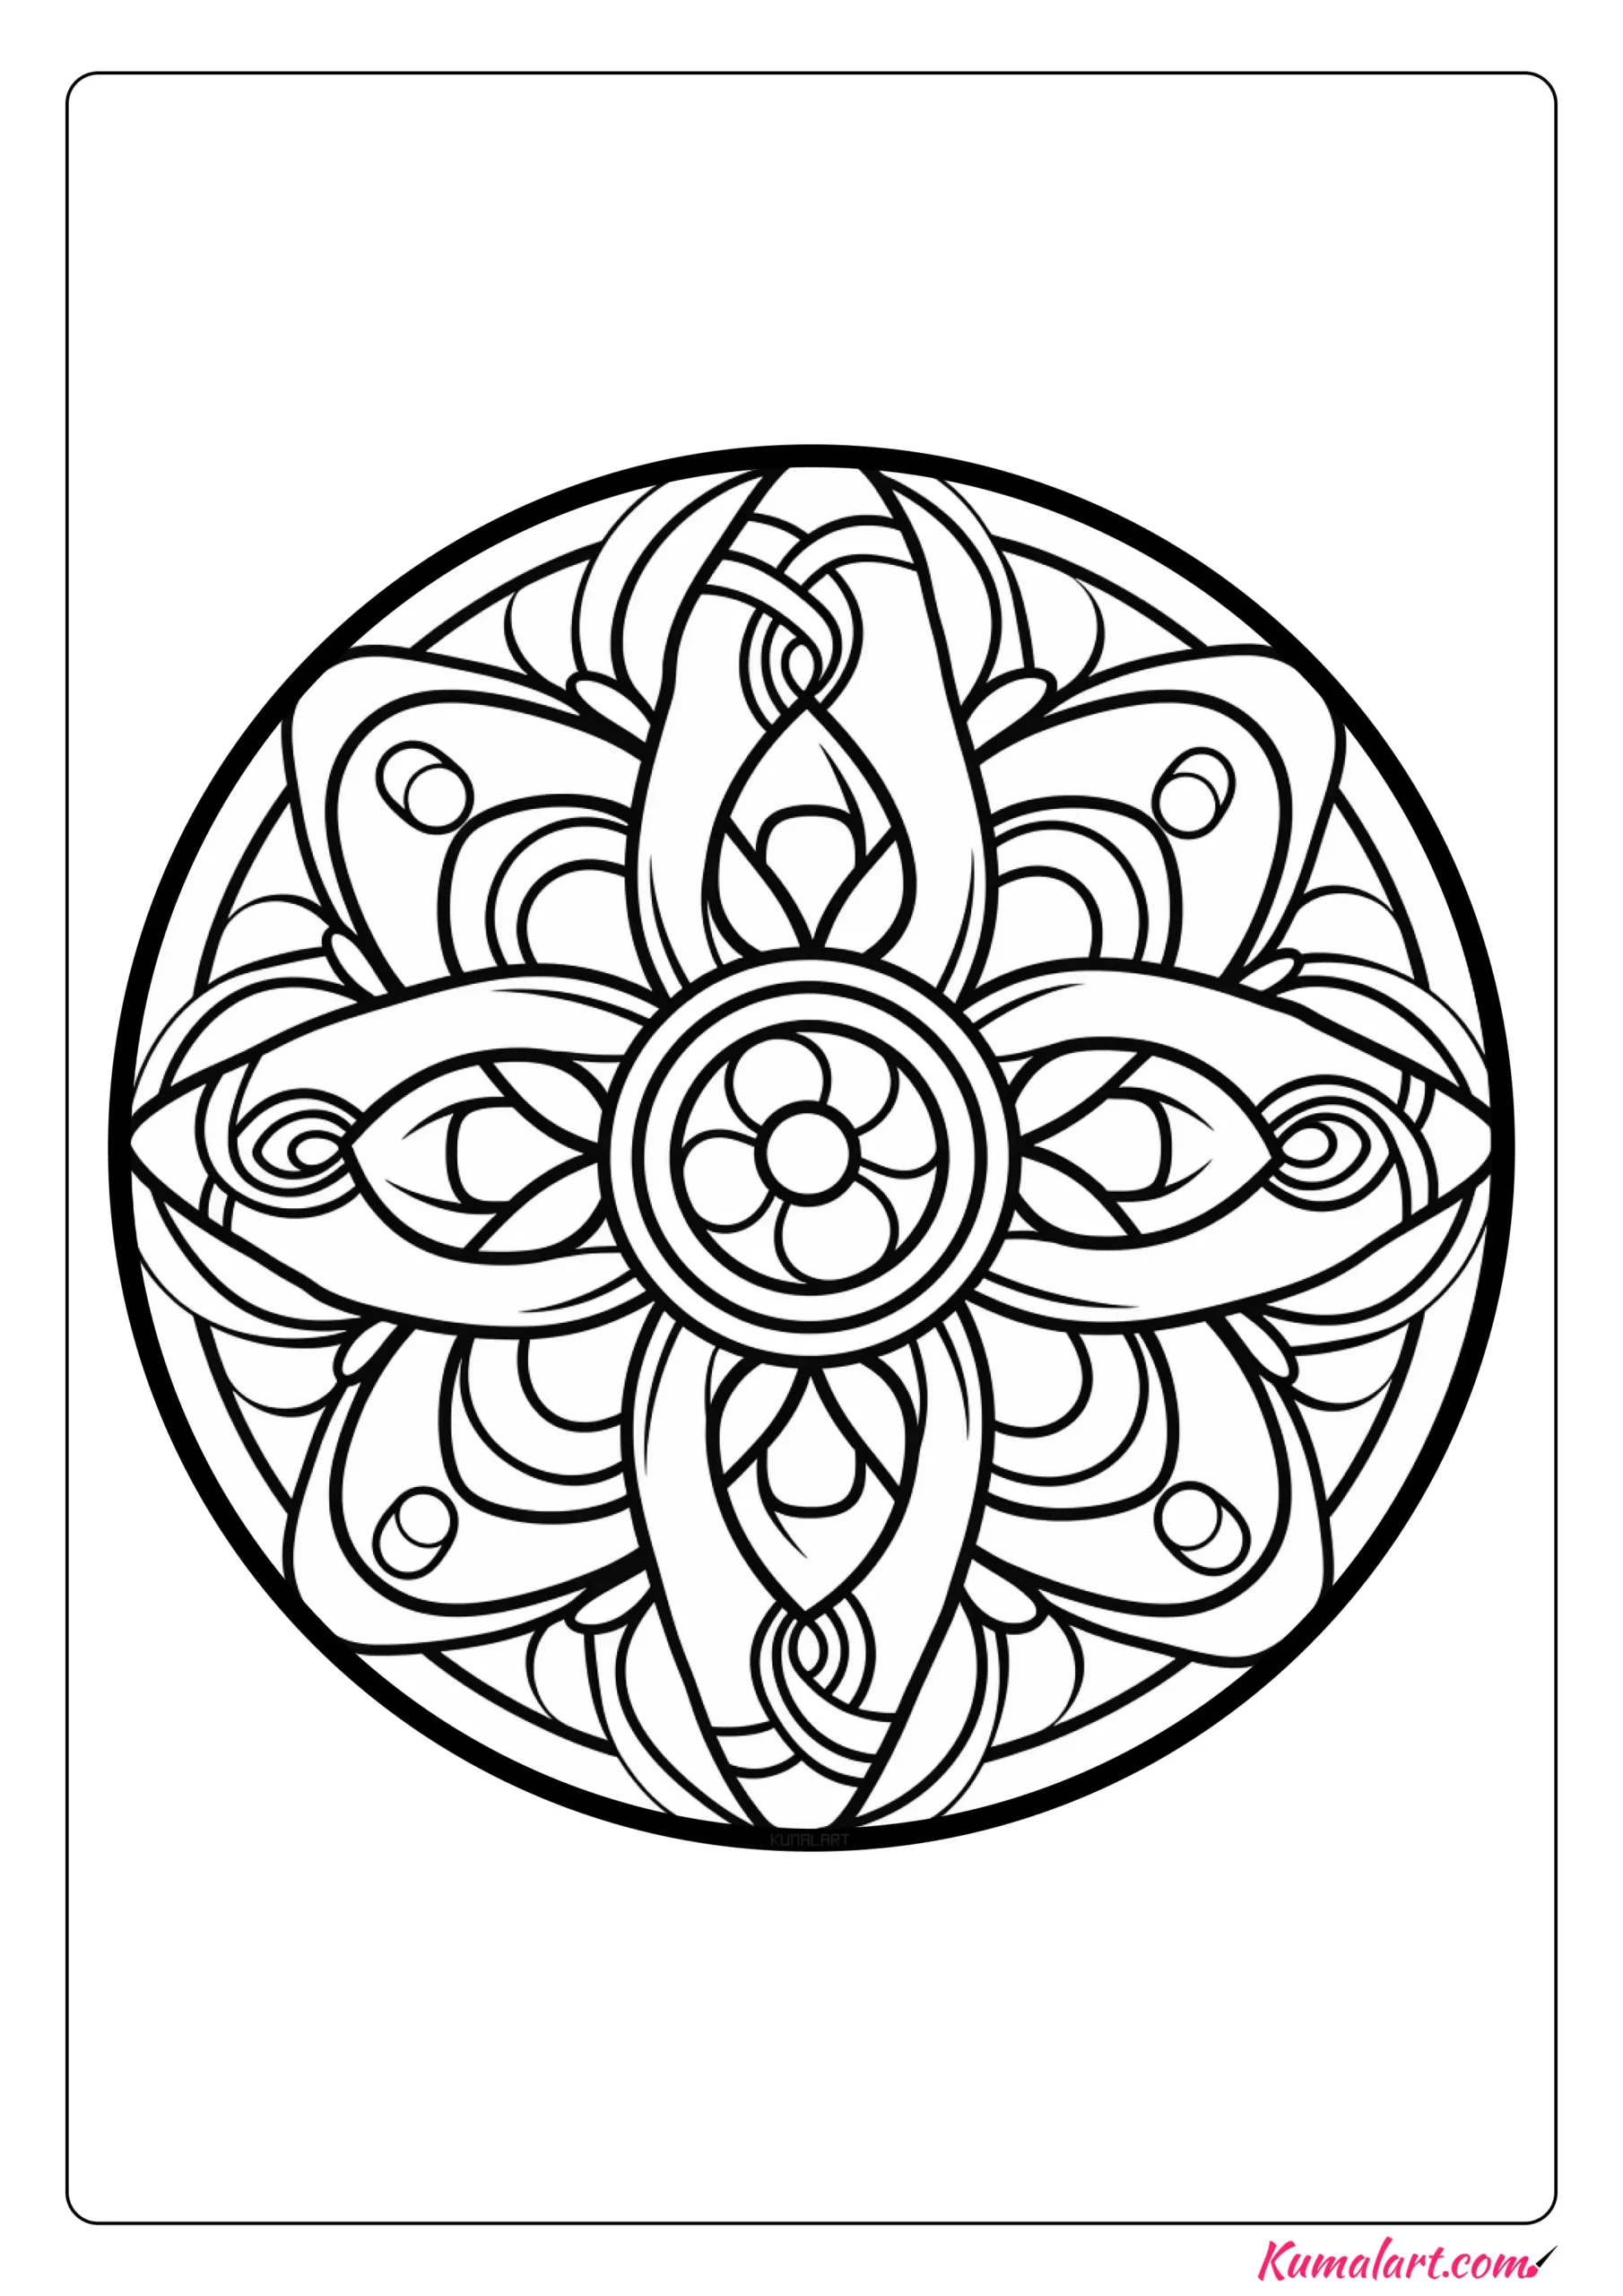 Rejuvenating Therapeutic Coloring Page